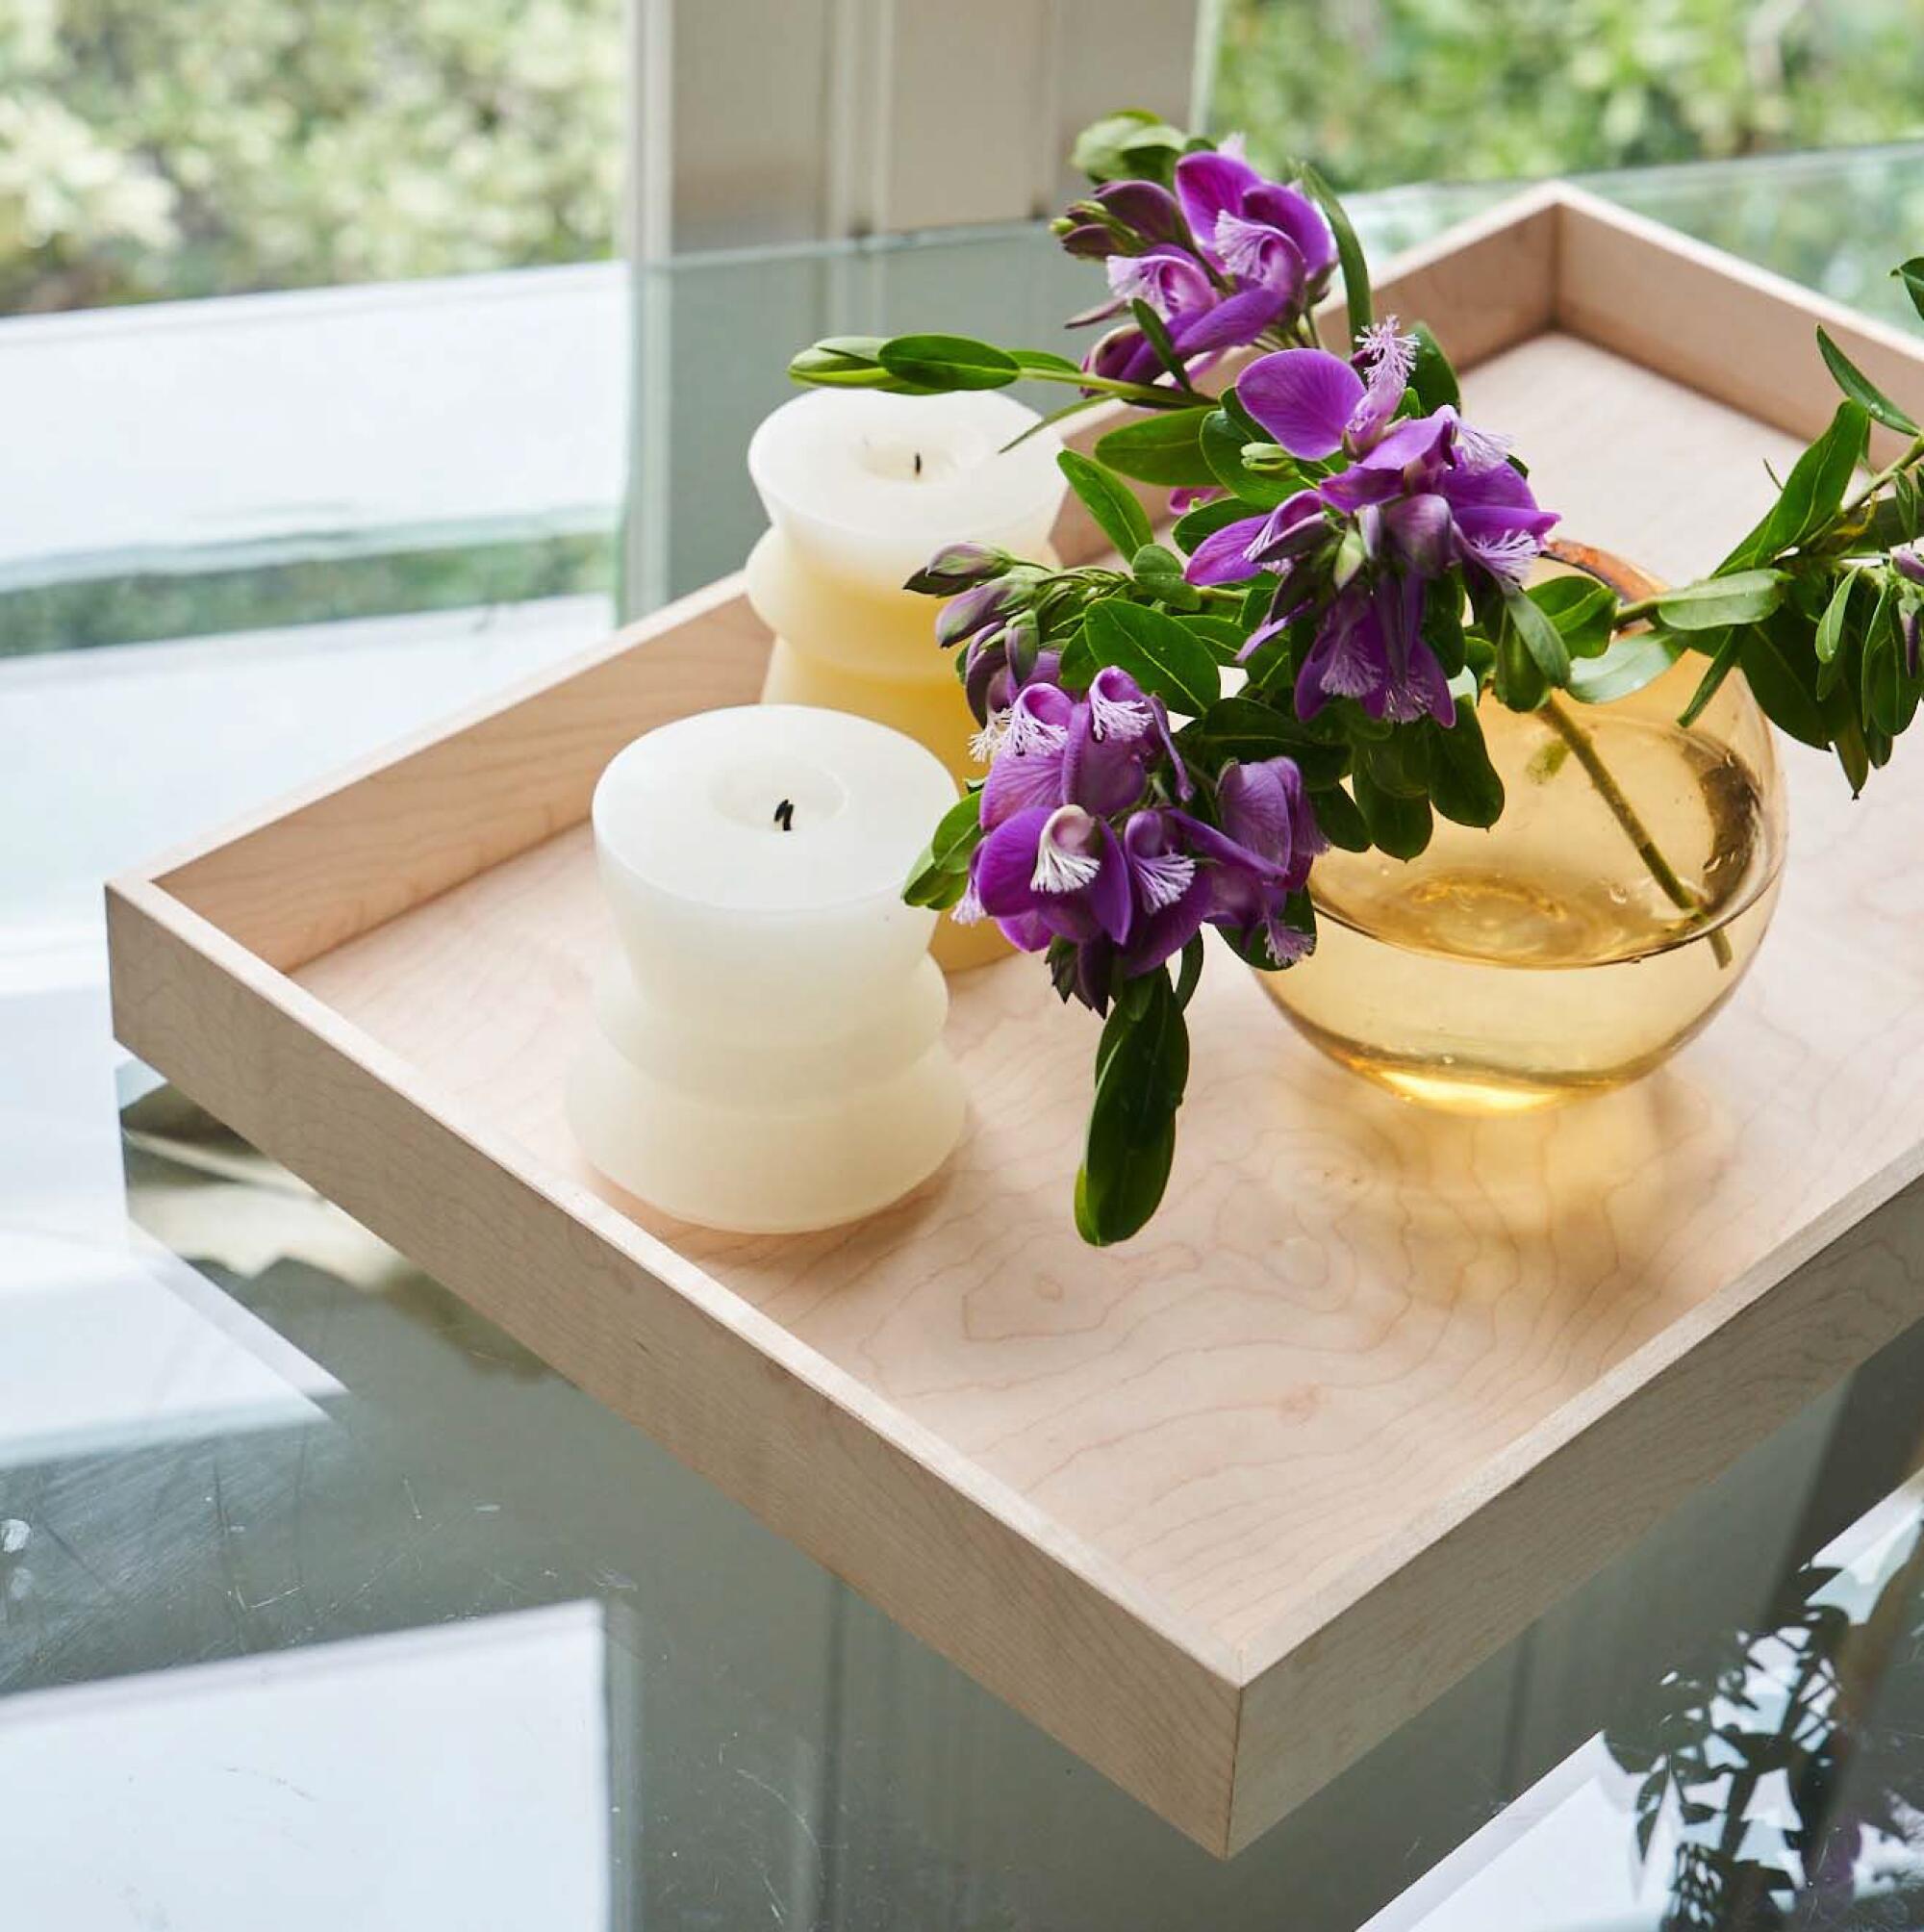 A maple wood serving tray from Would Works